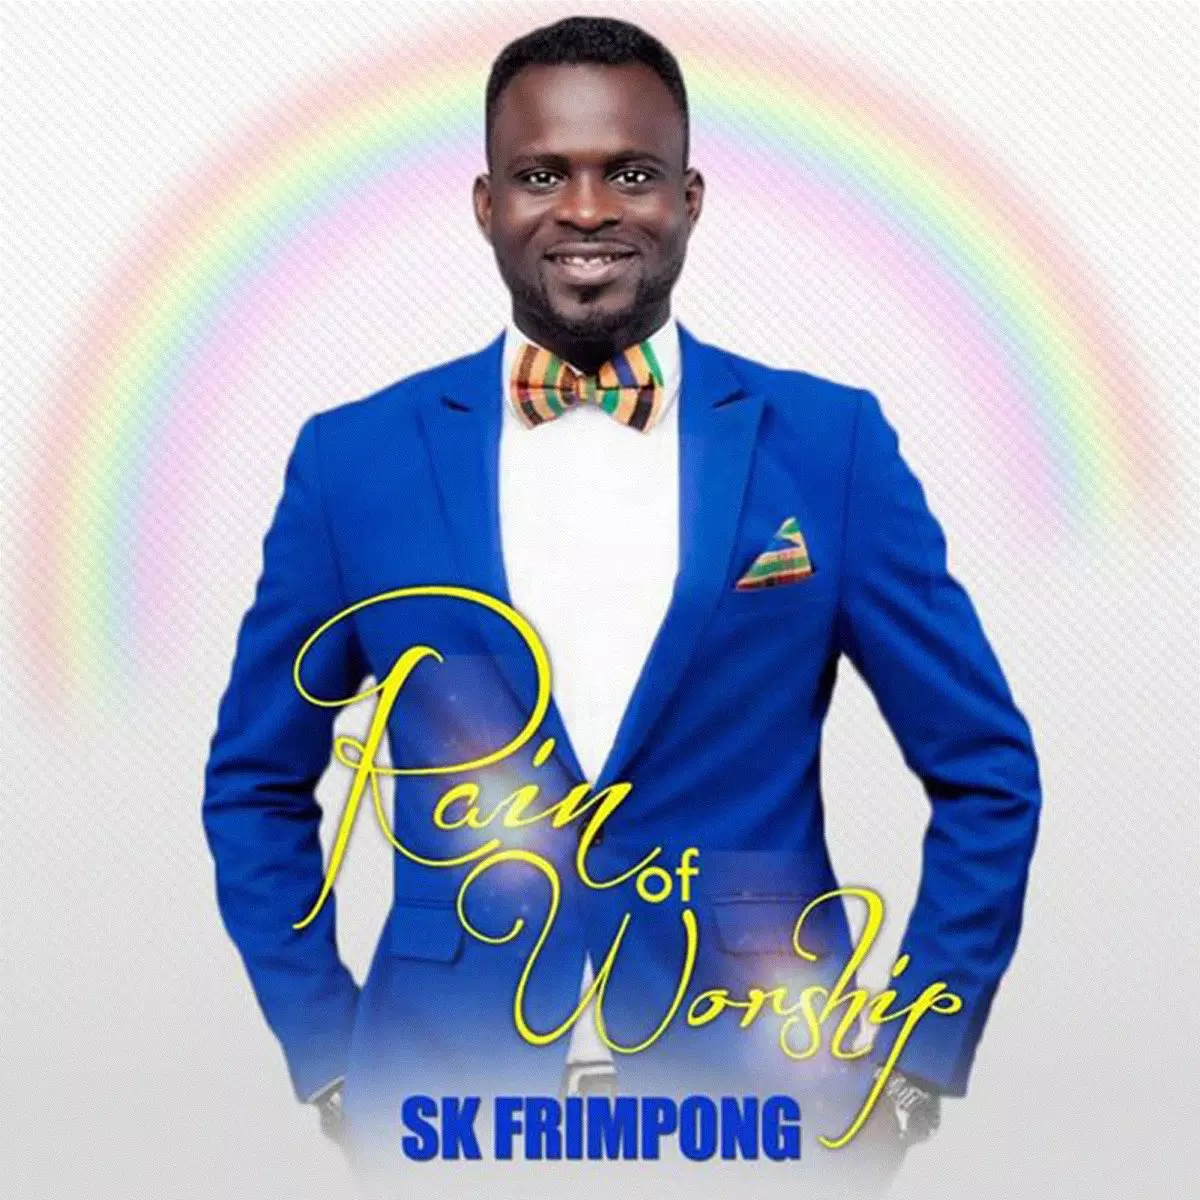 Rain of Worship by SK Frimpong on Apple Music